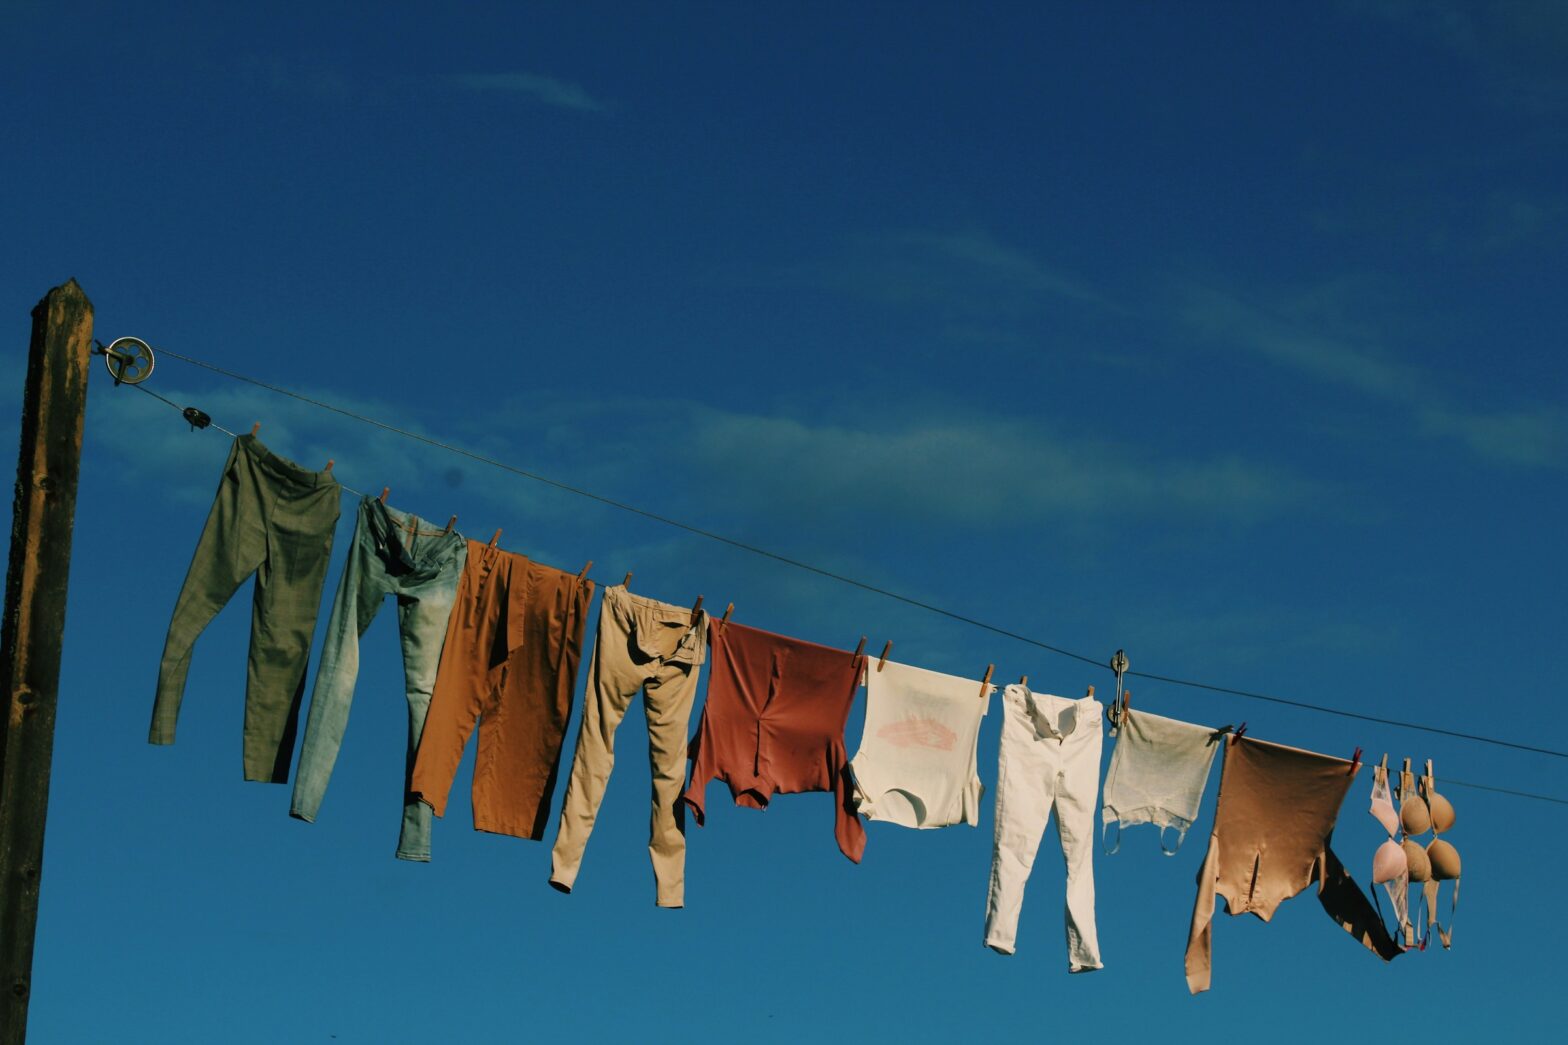 Laundry hanging on a line with a blue sky behind https://unsplash.com/photos/white-and-blue-textiles-on-wire-during-daytime-zjasO1yZ6hQ